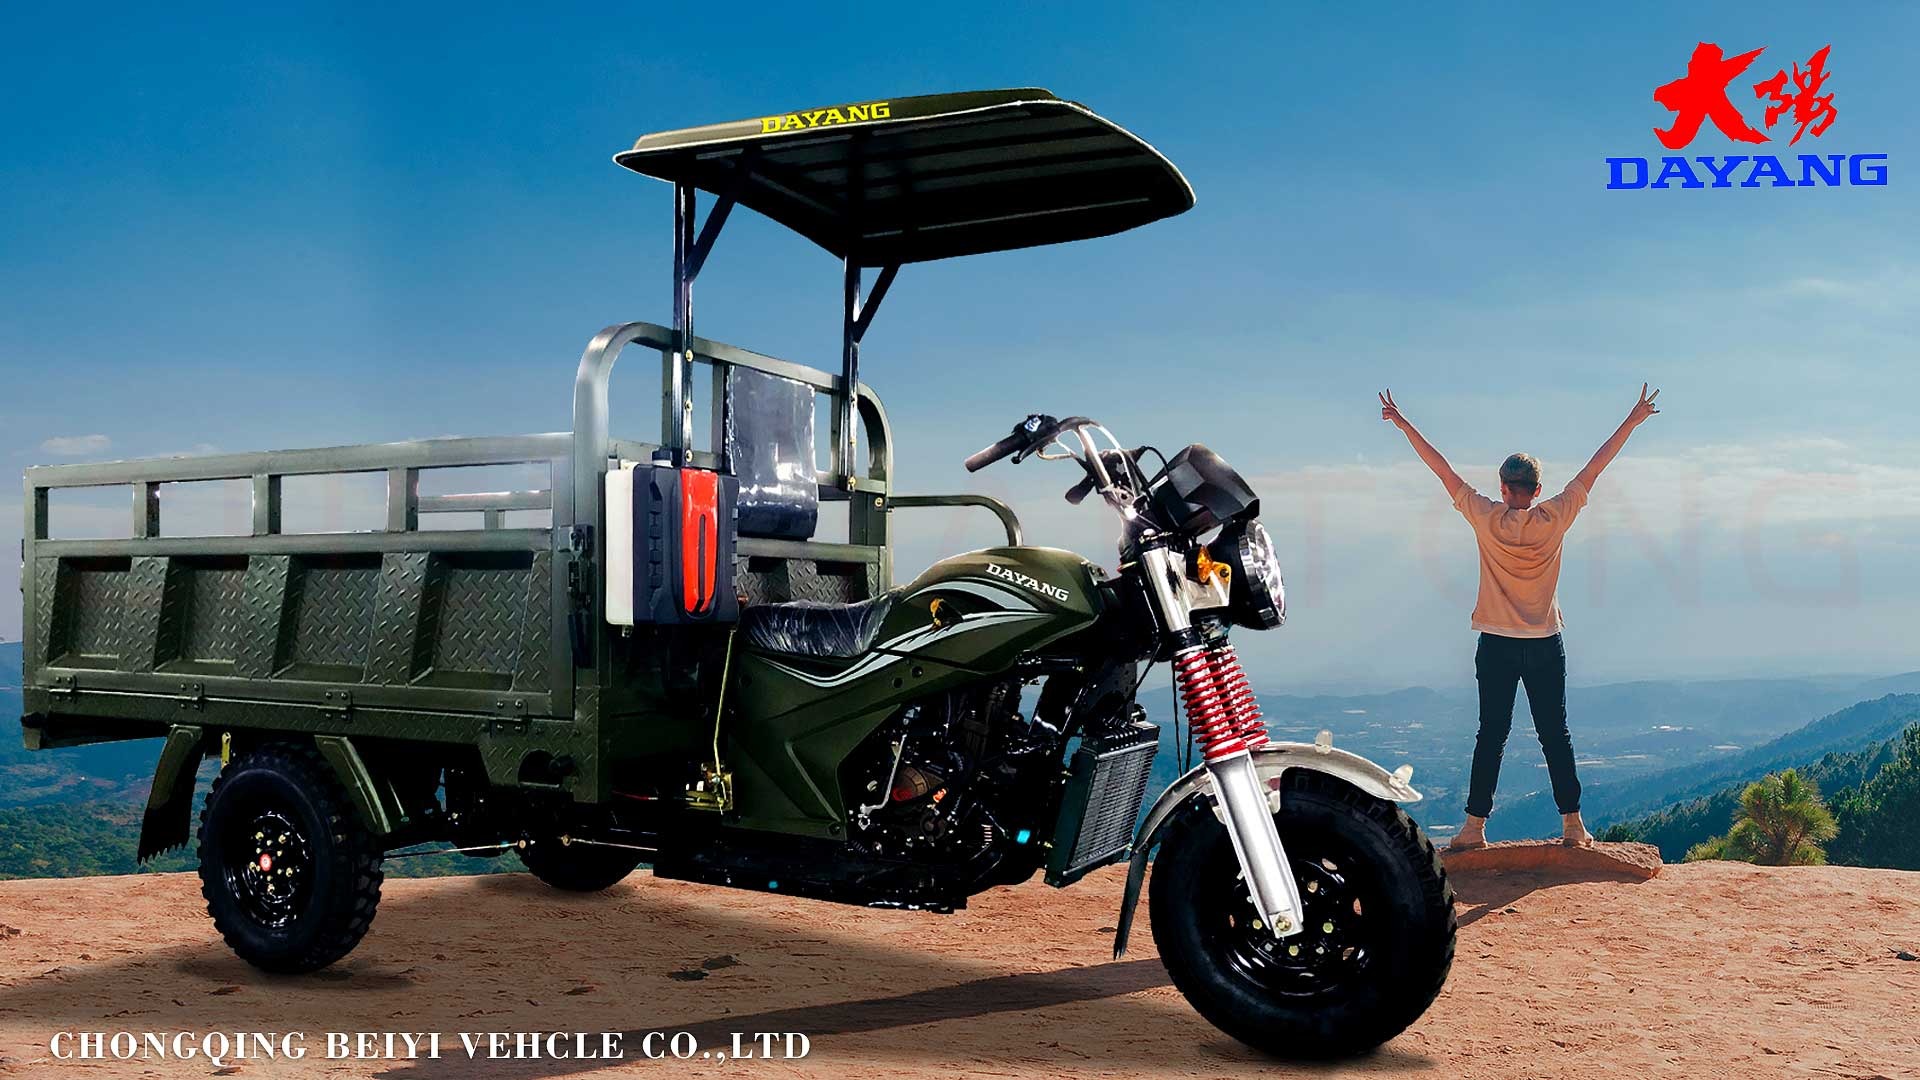 DY-TP1 Best-selling tricycle models in Tanzania and African countries with 200cc engine